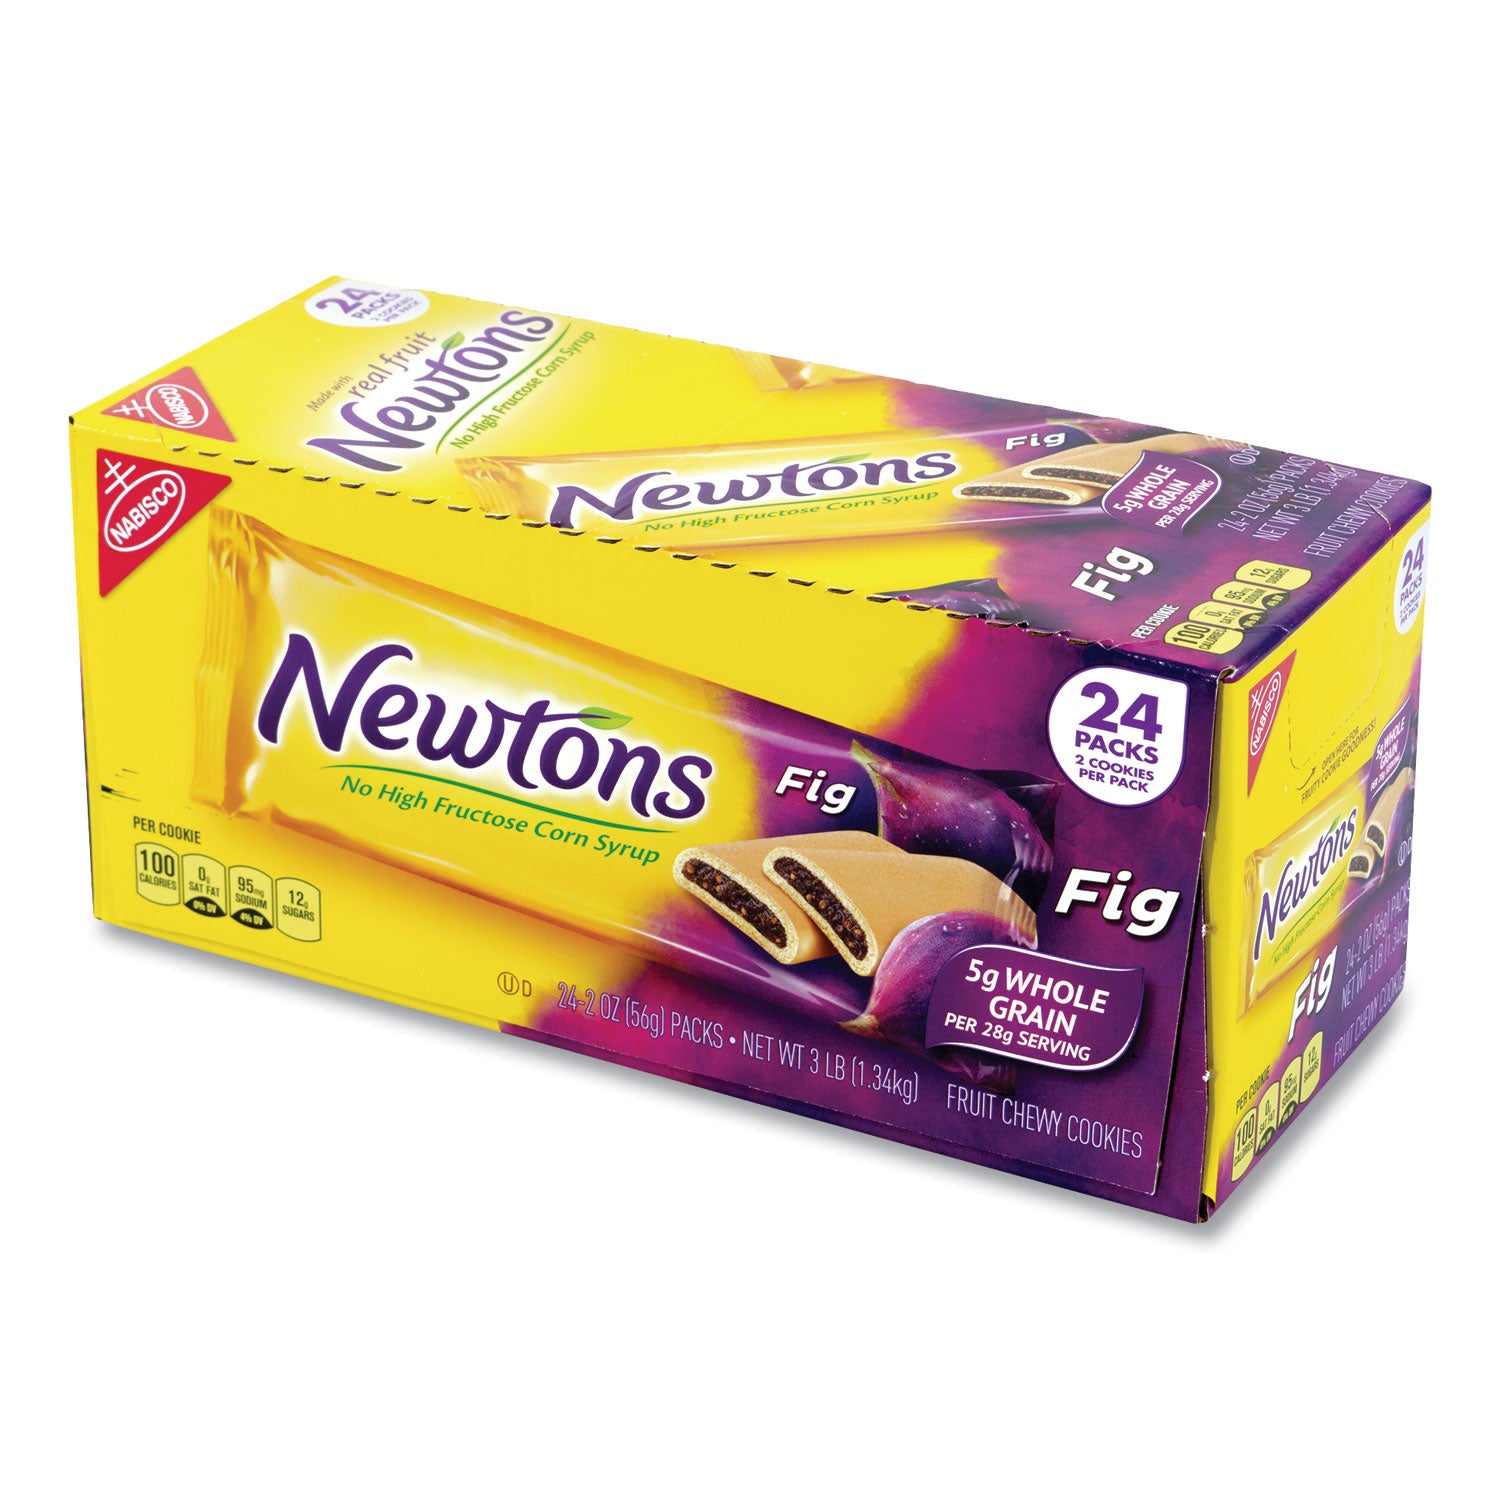 fig-newtons-2-oz-pack-2-cookies-pack-24-packs-box-ships-in-1-3-business-days_grr22000462 - 1